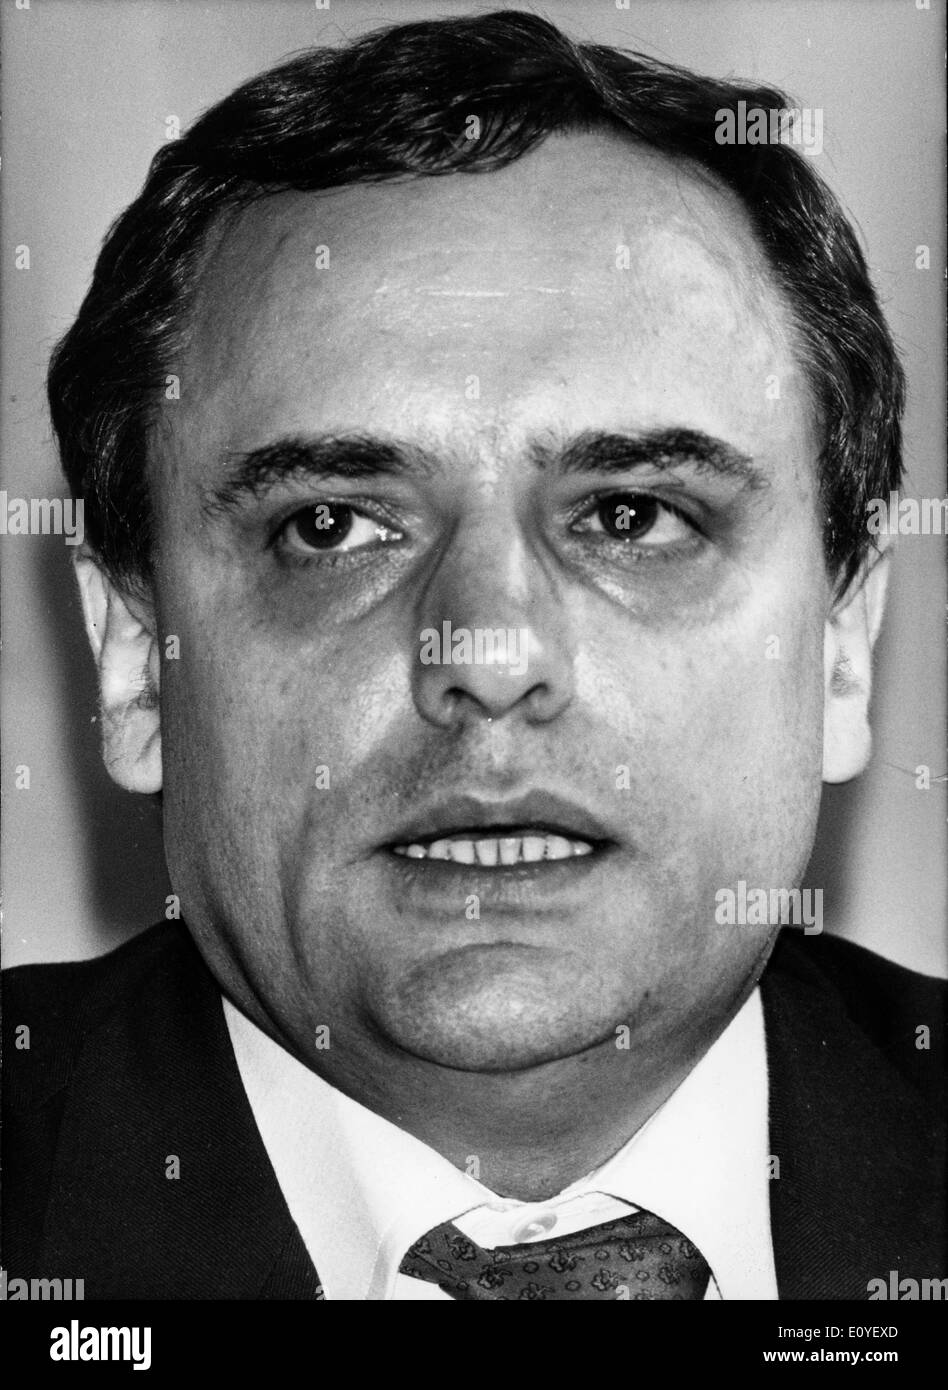 Jan. 01, 1970 - File Photo: circa 1970s, location unknown. JACQUES BARROT (born 3 February 1937 in Yssingeaux, Haute-Loire) is a French politician, who has served as European Commissioner for Justice (2008Ð2010), after four years as Commissioner for Transport (2004Ð2008) and Commissioner for Regional Policy for eight months (2004). He is also one of five vice-presidents of the 27-member Barroso Commission. He previously held various ministerial positions in France, and is a member of the right-wing political party UMP. Stock Photo